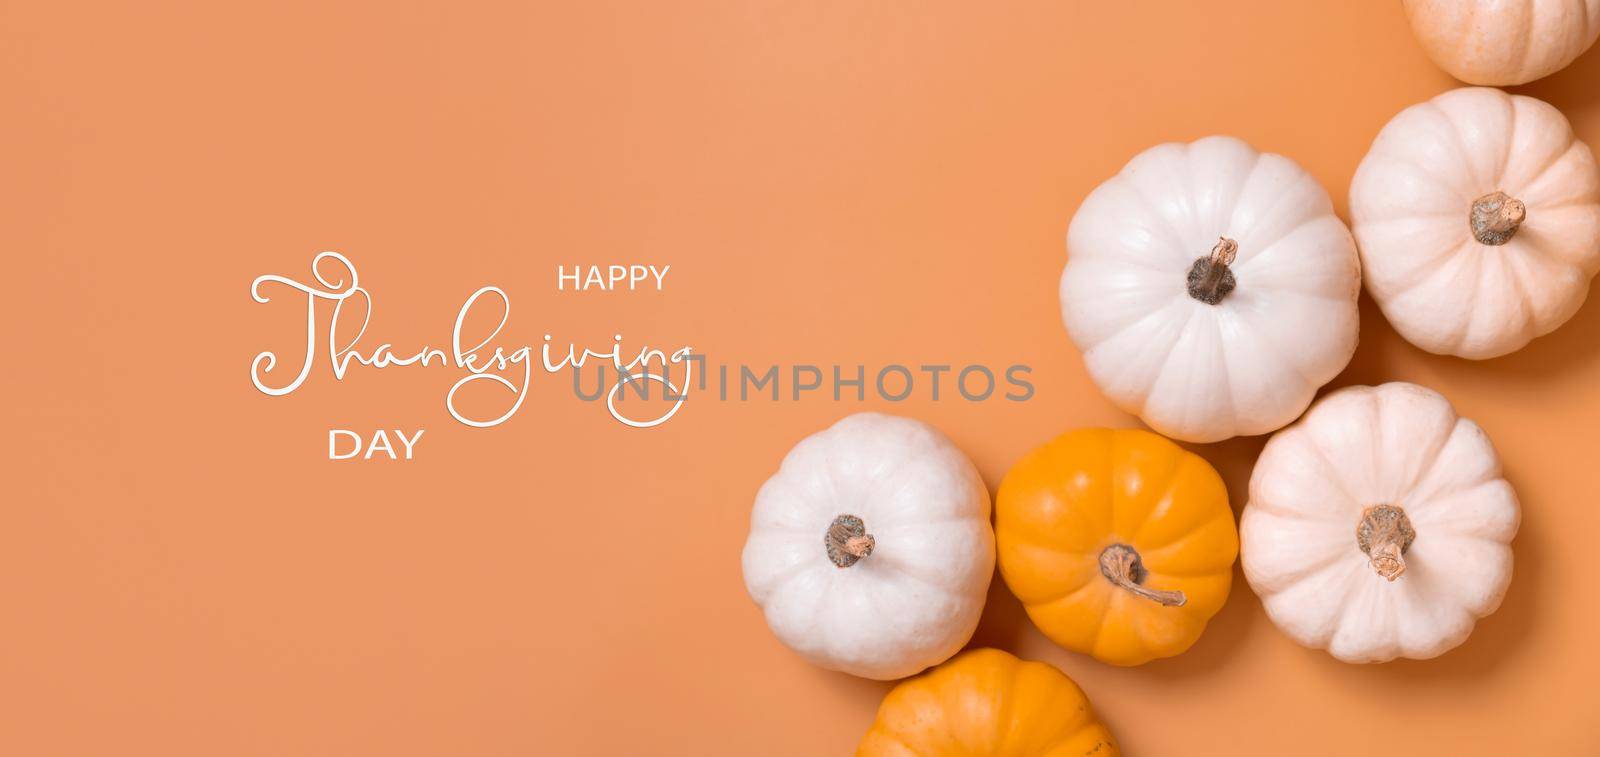 Banner with text Happy Thanksgiving Day and group of decorative pumpkins top view on orange background. by ssvimaliss